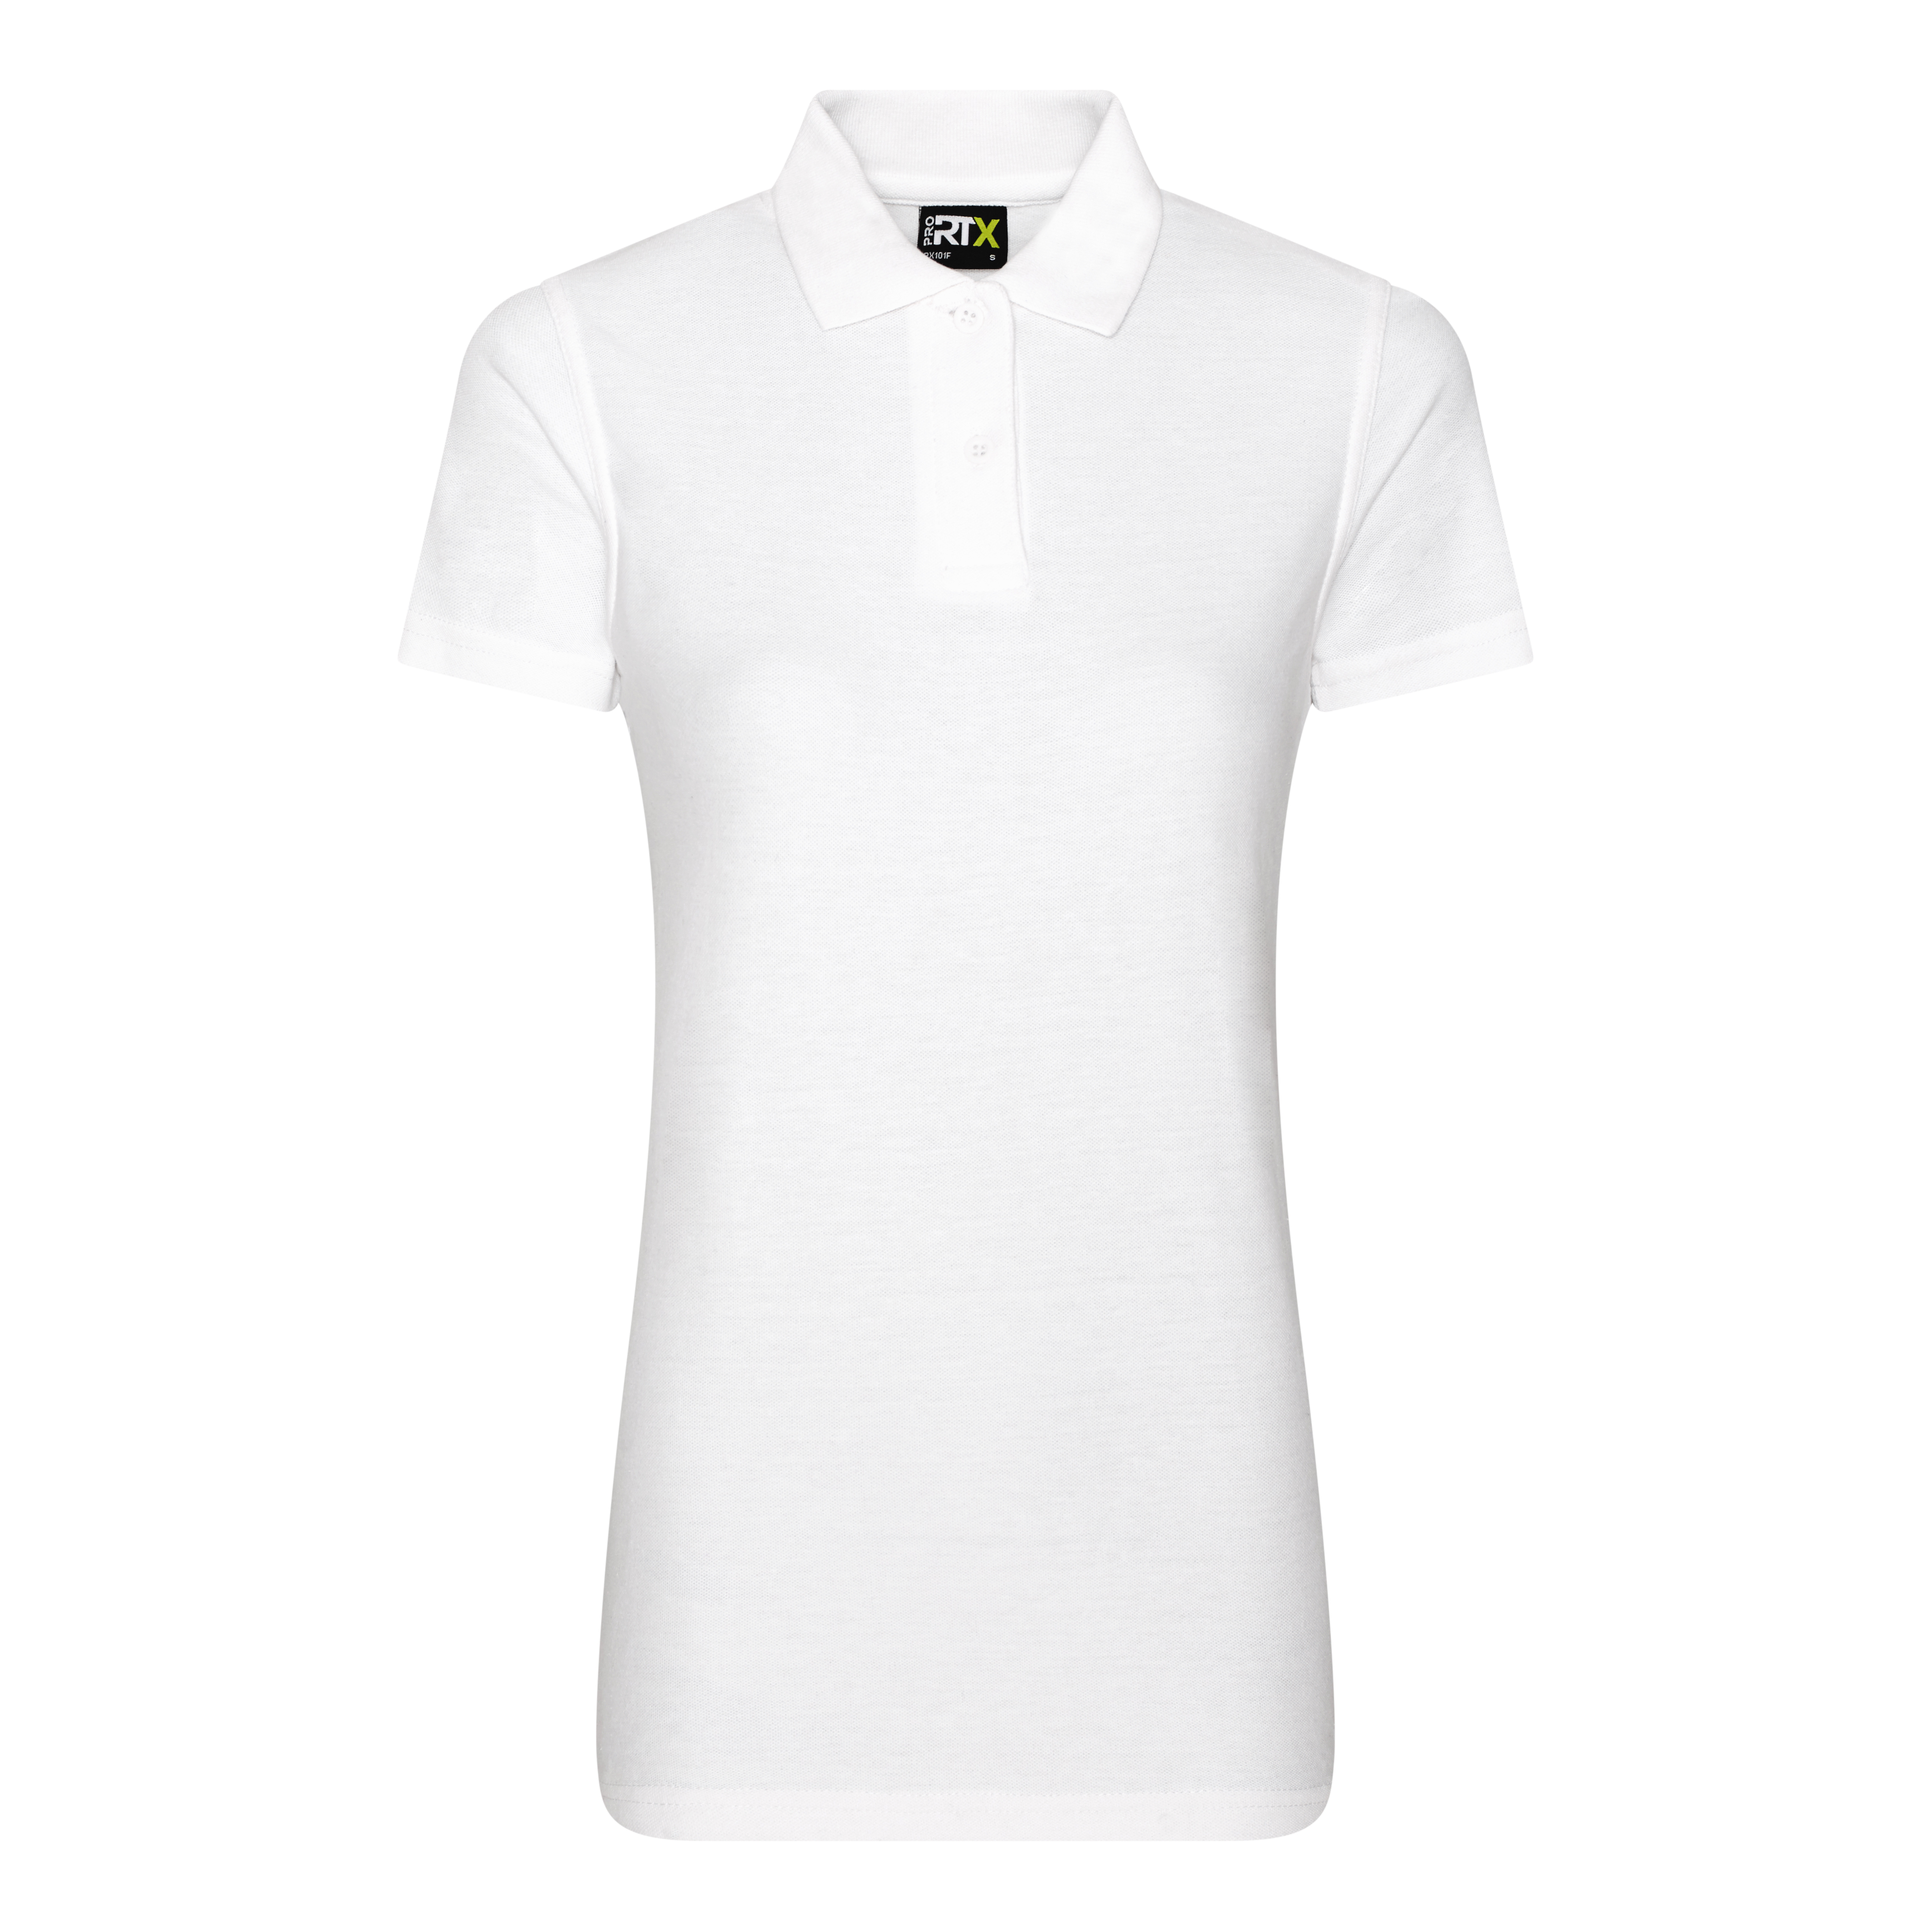 ax-httpswebsystems.s3.amazonaws.comtmp_for_downloadpro-rtx-ladies-pro-polo-white.jpg